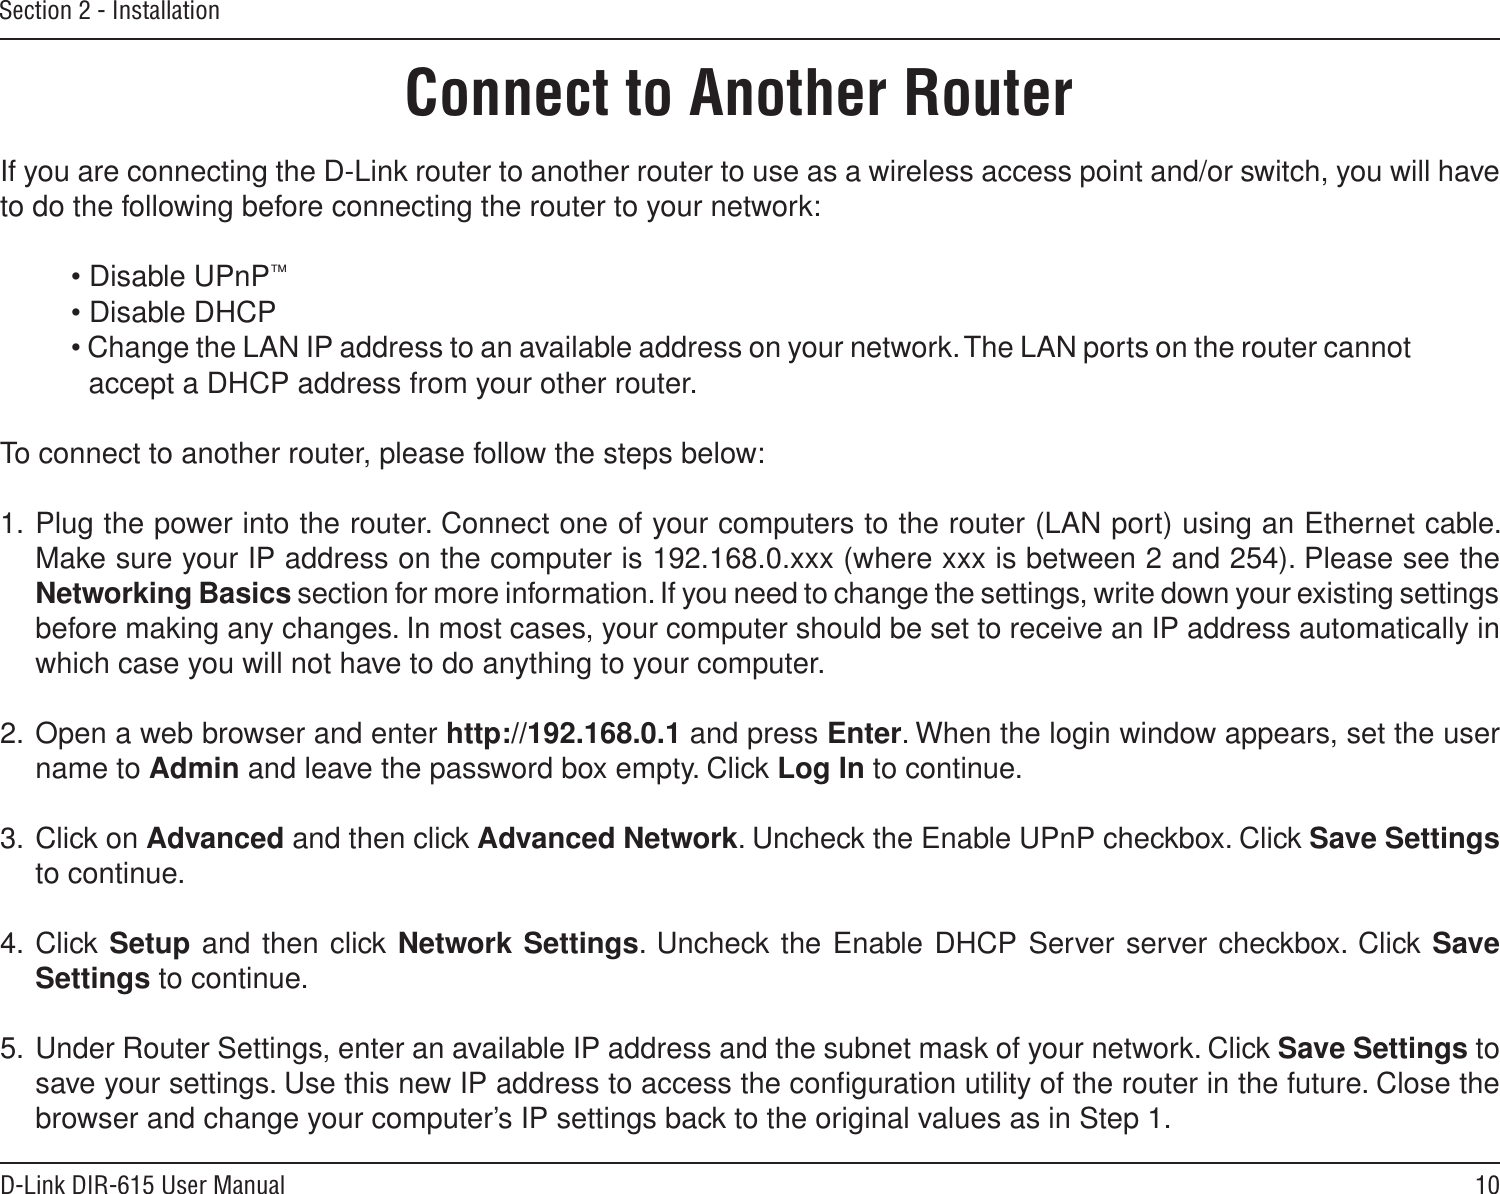 10D-Link DIR-615 User ManualSection 2 - InstallationIf you are connecting the D-Link router to another router to use as a wireless access point and/or switch, you will have to do the following before connecting the router to your network:• Disable UPnP™• Disable DHCP• Change the LAN IP address to an available address on your network. The LAN ports on the router cannot accept a DHCP address from your other router.To connect to another router, please follow the steps below:1.  Plug the power into the router. Connect one of your computers to the router (LAN port) using an Ethernet cable. Make sure your IP address on the computer is 192.168.0.xxx (where xxx is between 2 and 254). Please see the Networking Basics section for more information. If you need to change the settings, write down your existing settings before making any changes. In most cases, your computer should be set to receive an IP address automatically in which case you will not have to do anything to your computer.2.  Open a web browser and enter http://192.168.0.1 and press Enter. When the login window appears, set the user name to Admin and leave the password box empty. Click Log In to continue.3.  Click on Advanced and then click Advanced Network. Uncheck the Enable UPnP checkbox. Click Save Settings to continue. 4.  Click Setup and then click Network Settings. Uncheck the Enable DHCP Server server checkbox. Click Save Settings to continue.5.  Under Router Settings, enter an available IP address and the subnet mask of your network. Click Save Settings to save your settings. Use this new IP address to access the conﬁguration utility of the router in the future. Close the browser and change your computer’s IP settings back to the original values as in Step 1.Connect to Another Router